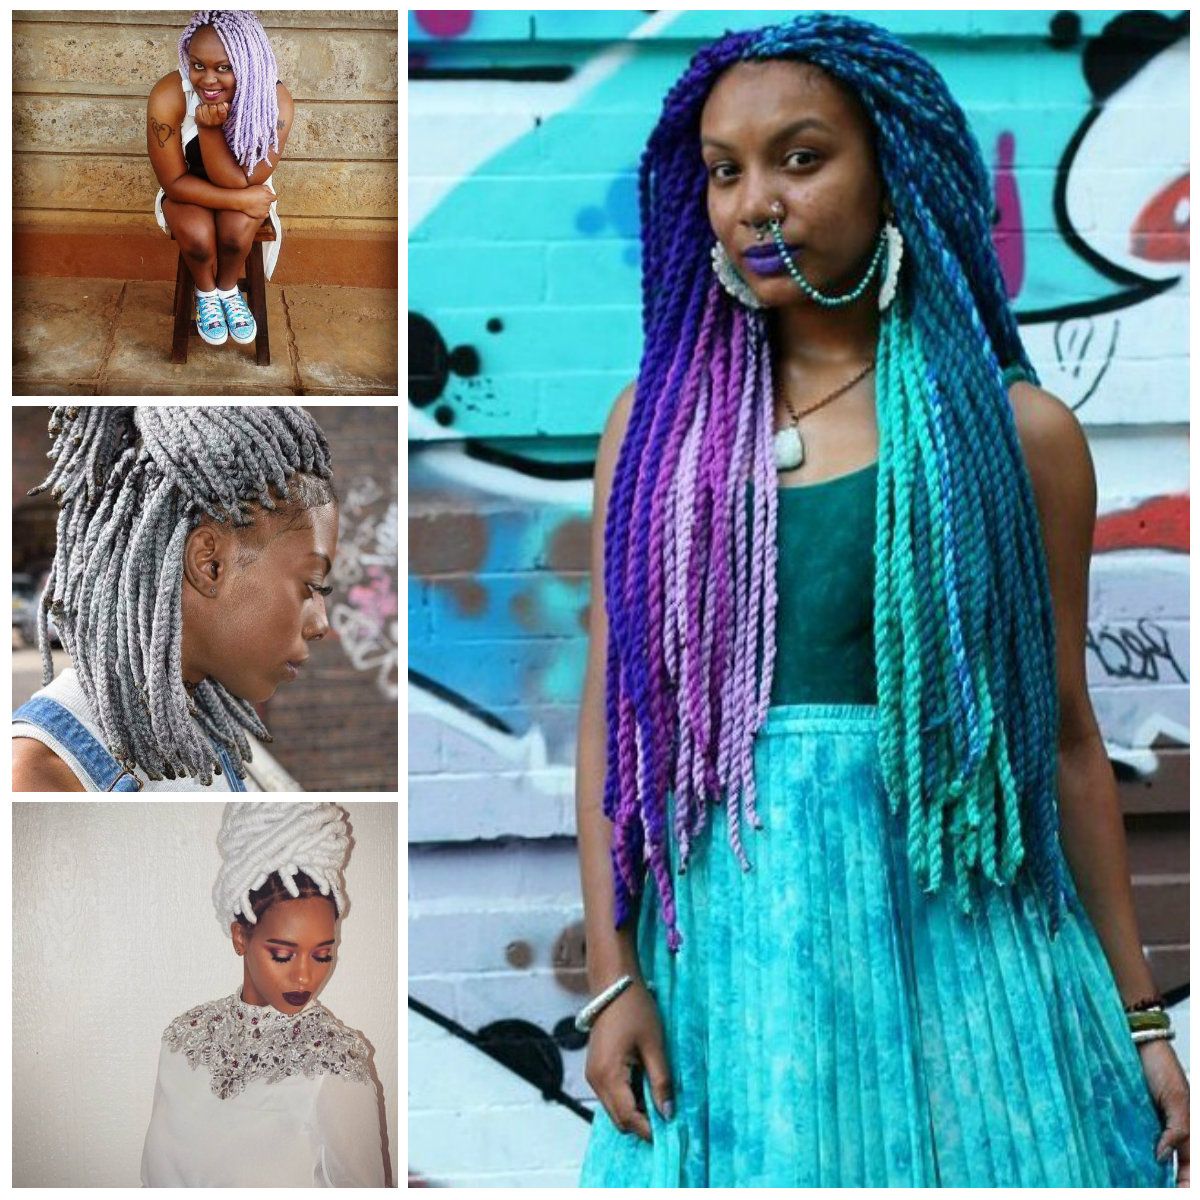 2019 Haircuts, Hairstyles And Hair Colors Throughout Most Up To Date Side Swept Yarn Twists Hairstyles (View 18 of 20)